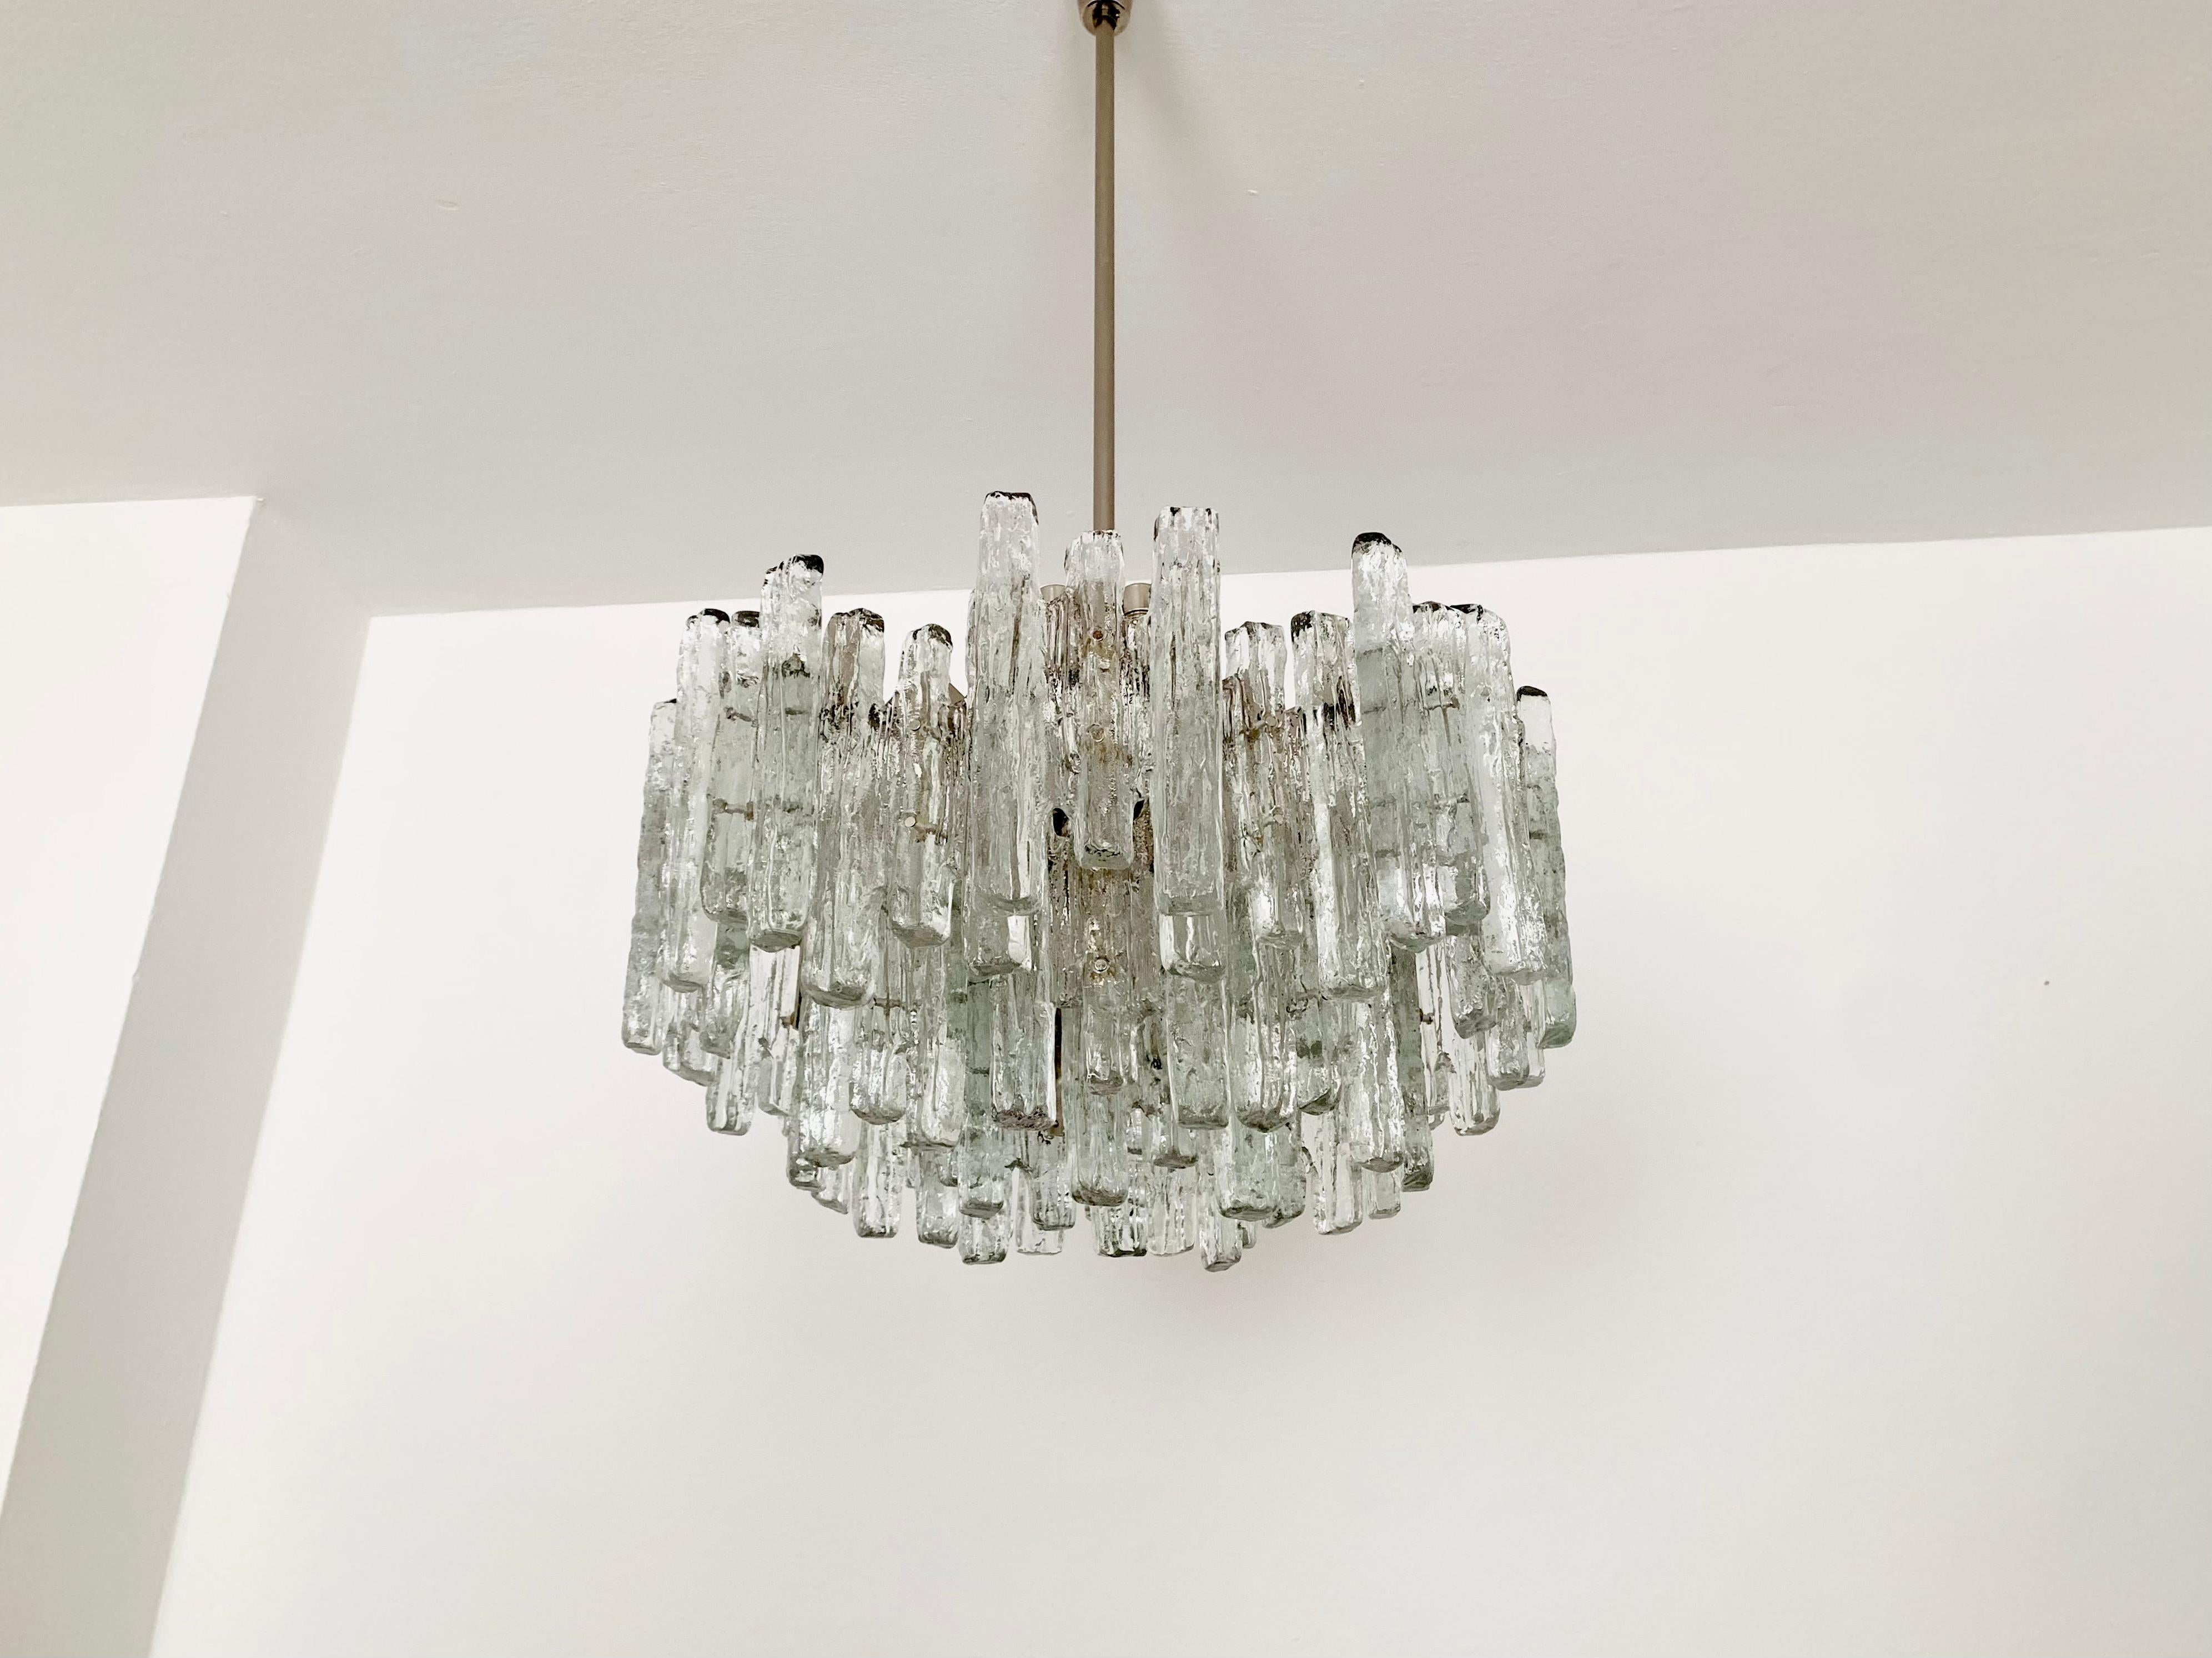 Impressively large and very heavy ice glass chandelier from the 1960s.
The beautifully formed Murano glass elements create an impressive, sparkling play of light.
Exceptionally high-quality workmanship.
Very noble and luxurious appearance and a real